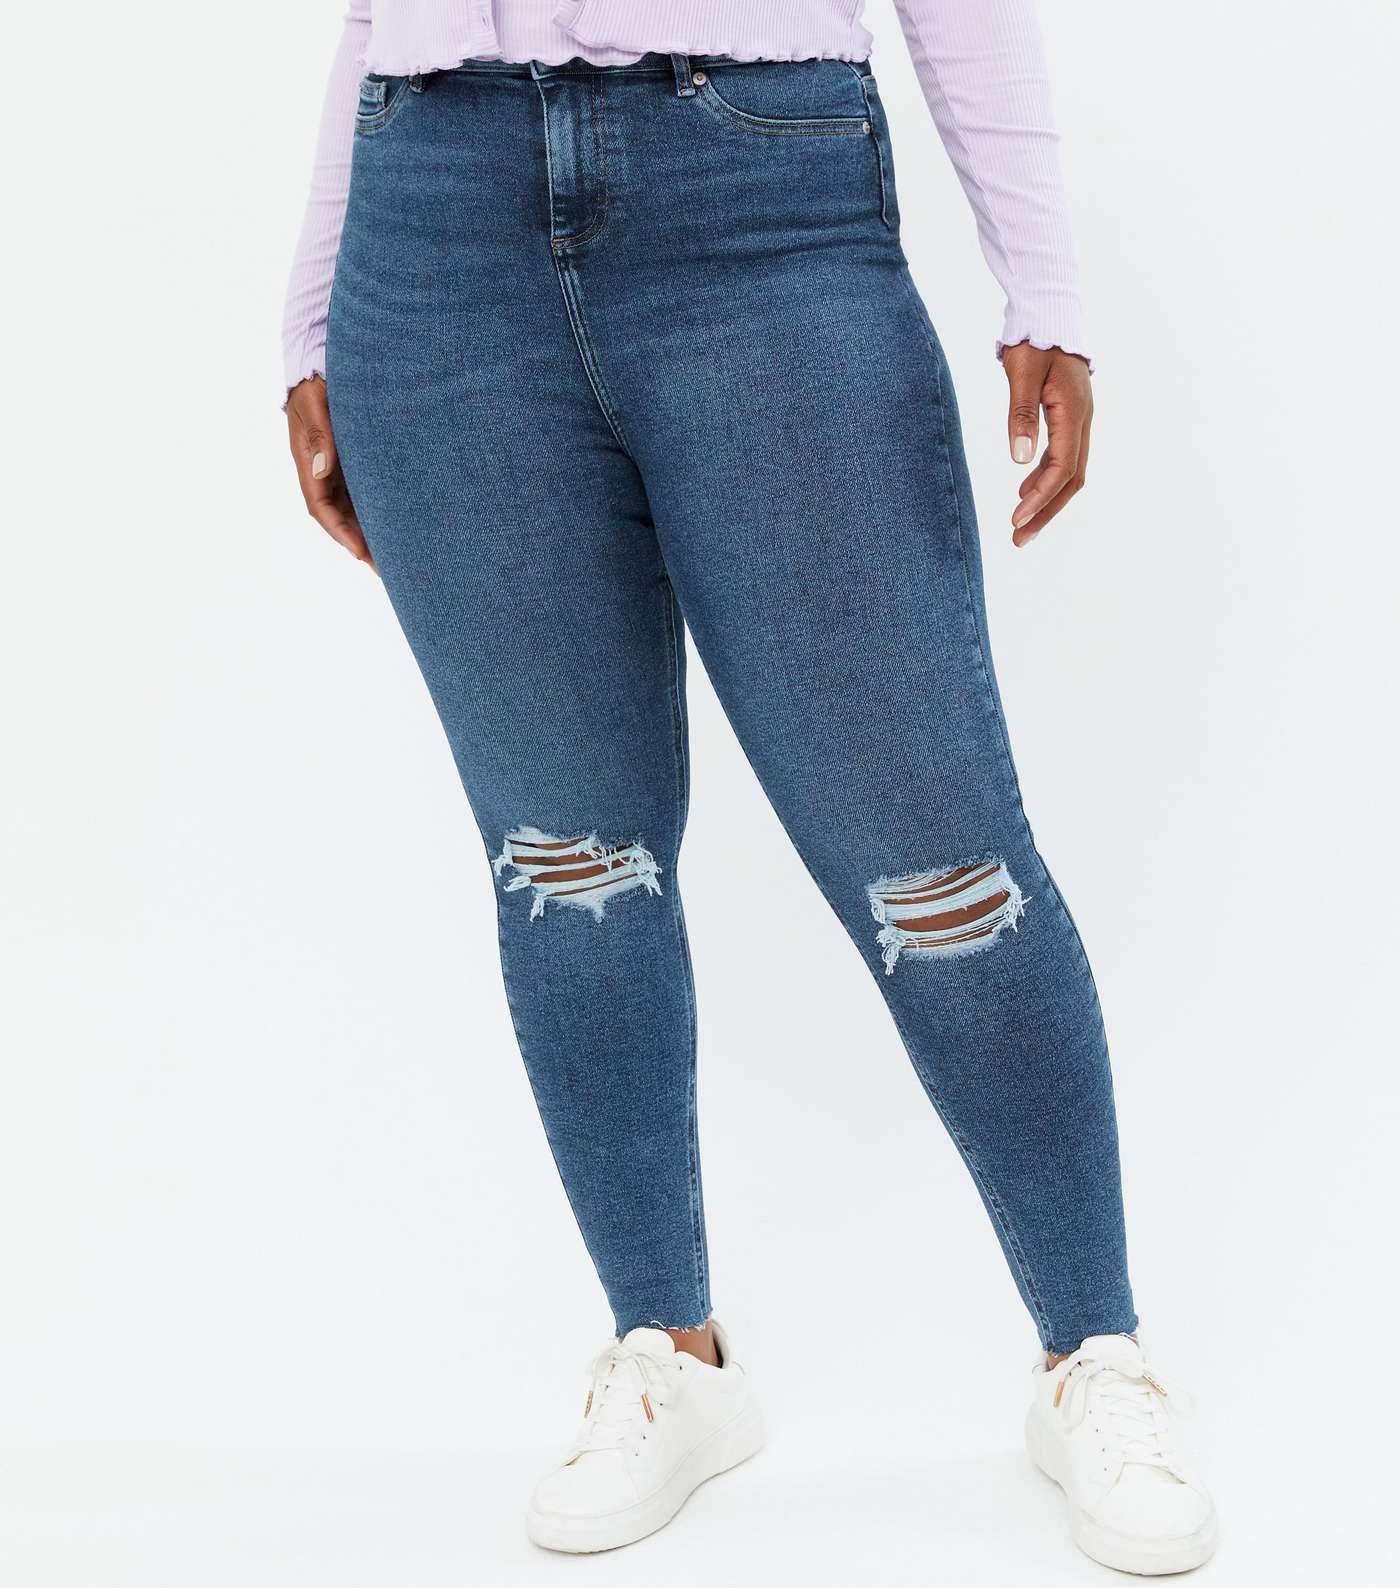 Curves Blue Rinse Wash Ripped High Waist Hallie Super Skinny Jeans Image 2